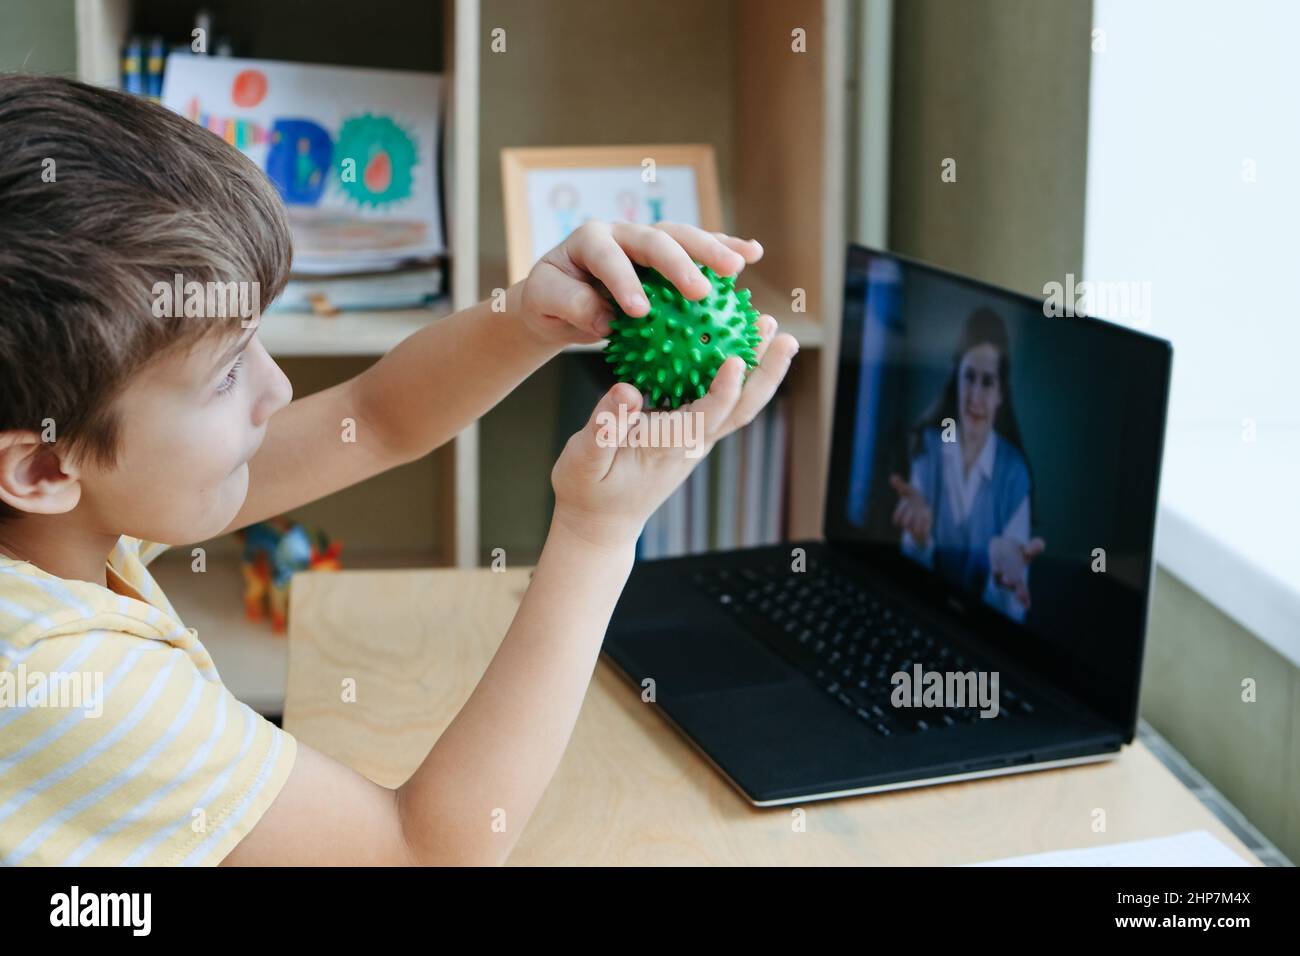 8 years old boy sit by desk with laptop and do exercise with massage ball Stock Photo